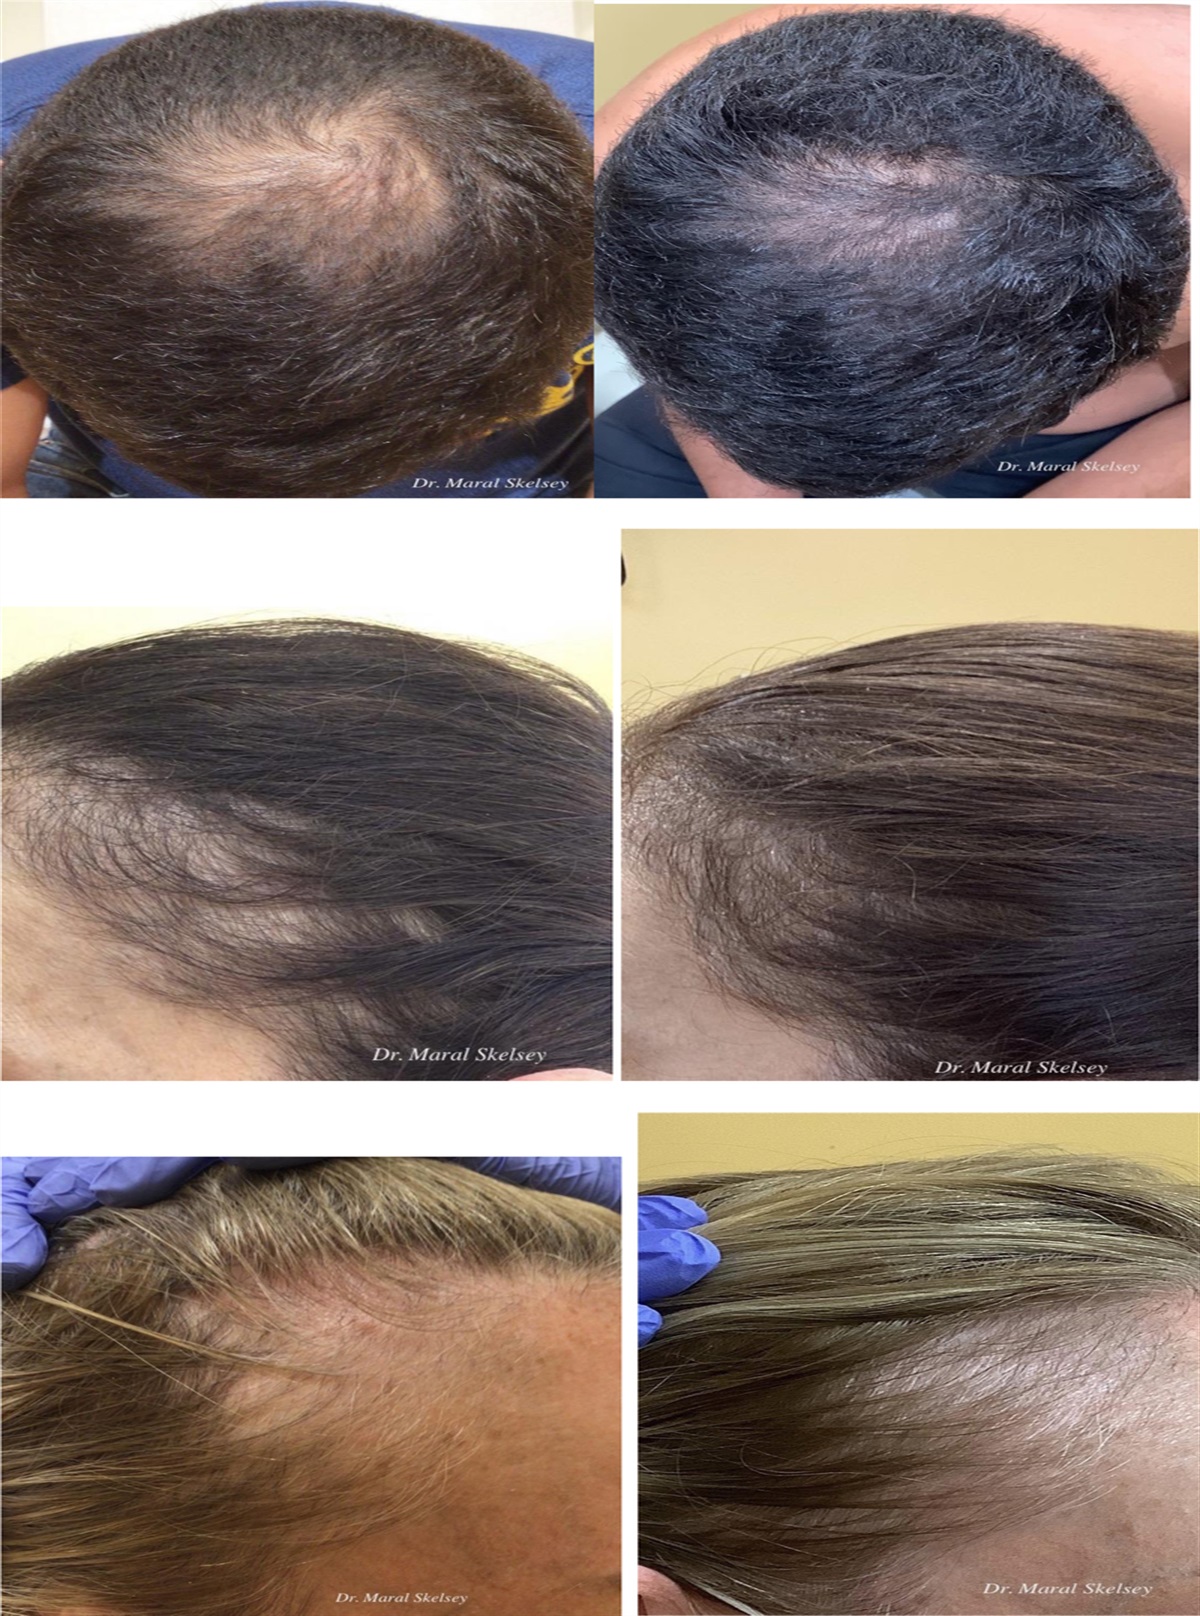 What's Old Is New Again: New and Newly Rediscovered Alopecia Therapies